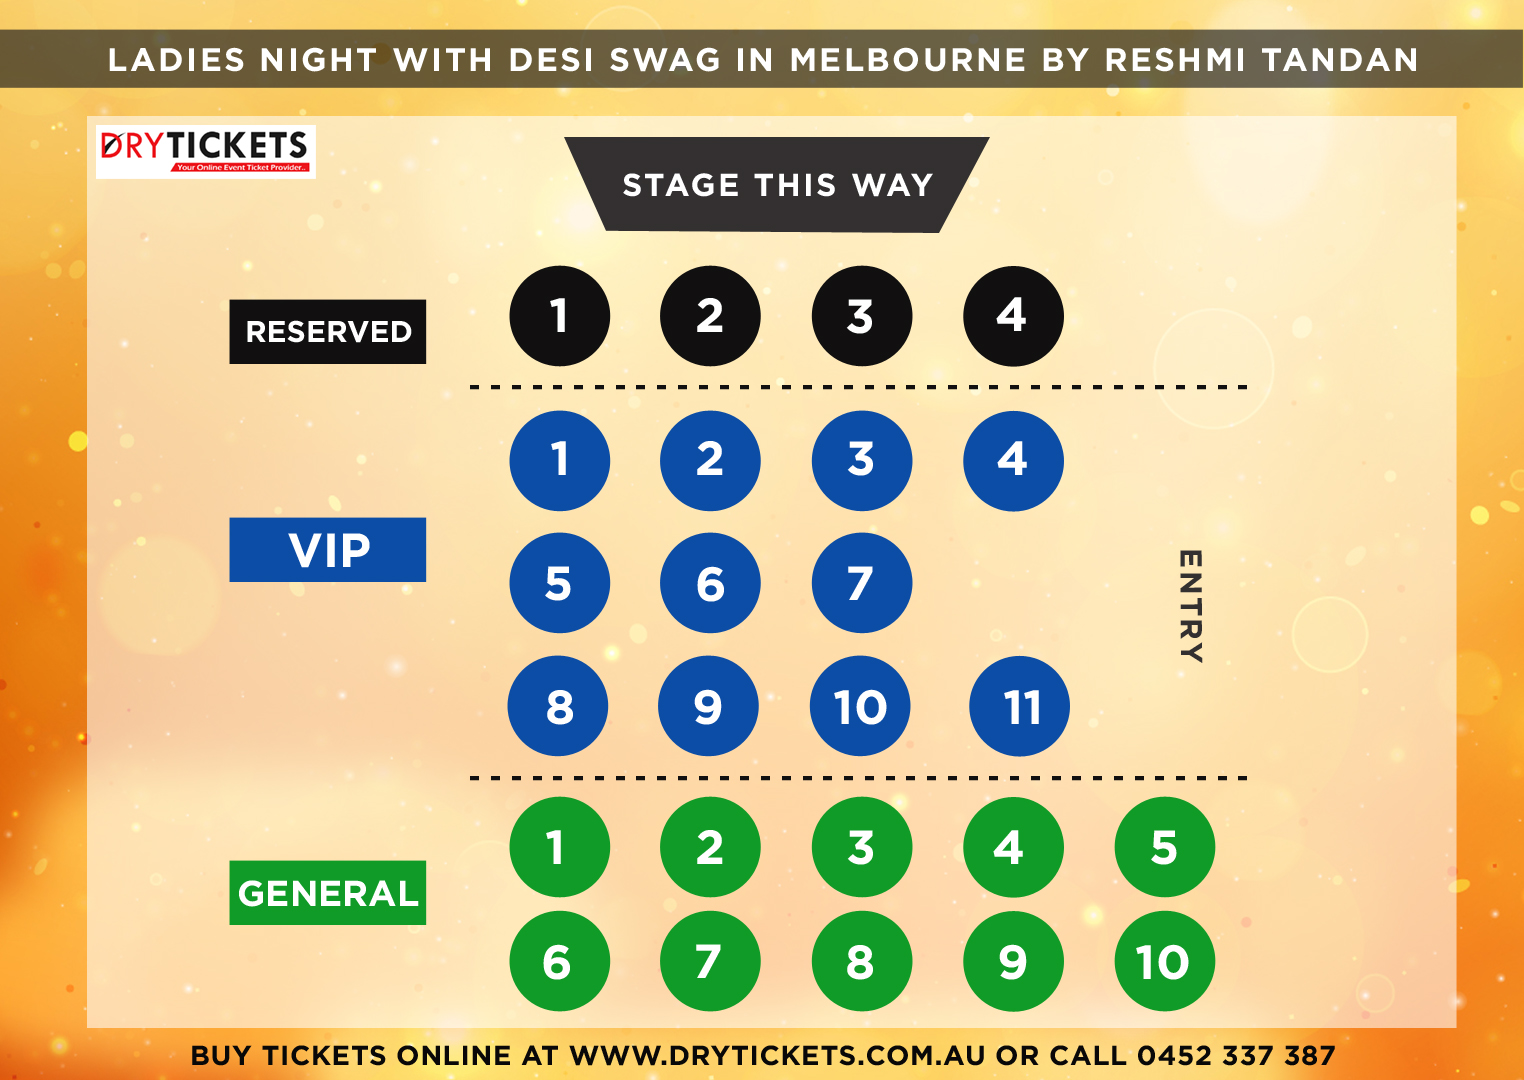 Ladies Night with Desi Swag In Melbourne by Reshmi Tandan 2022 Seating Map